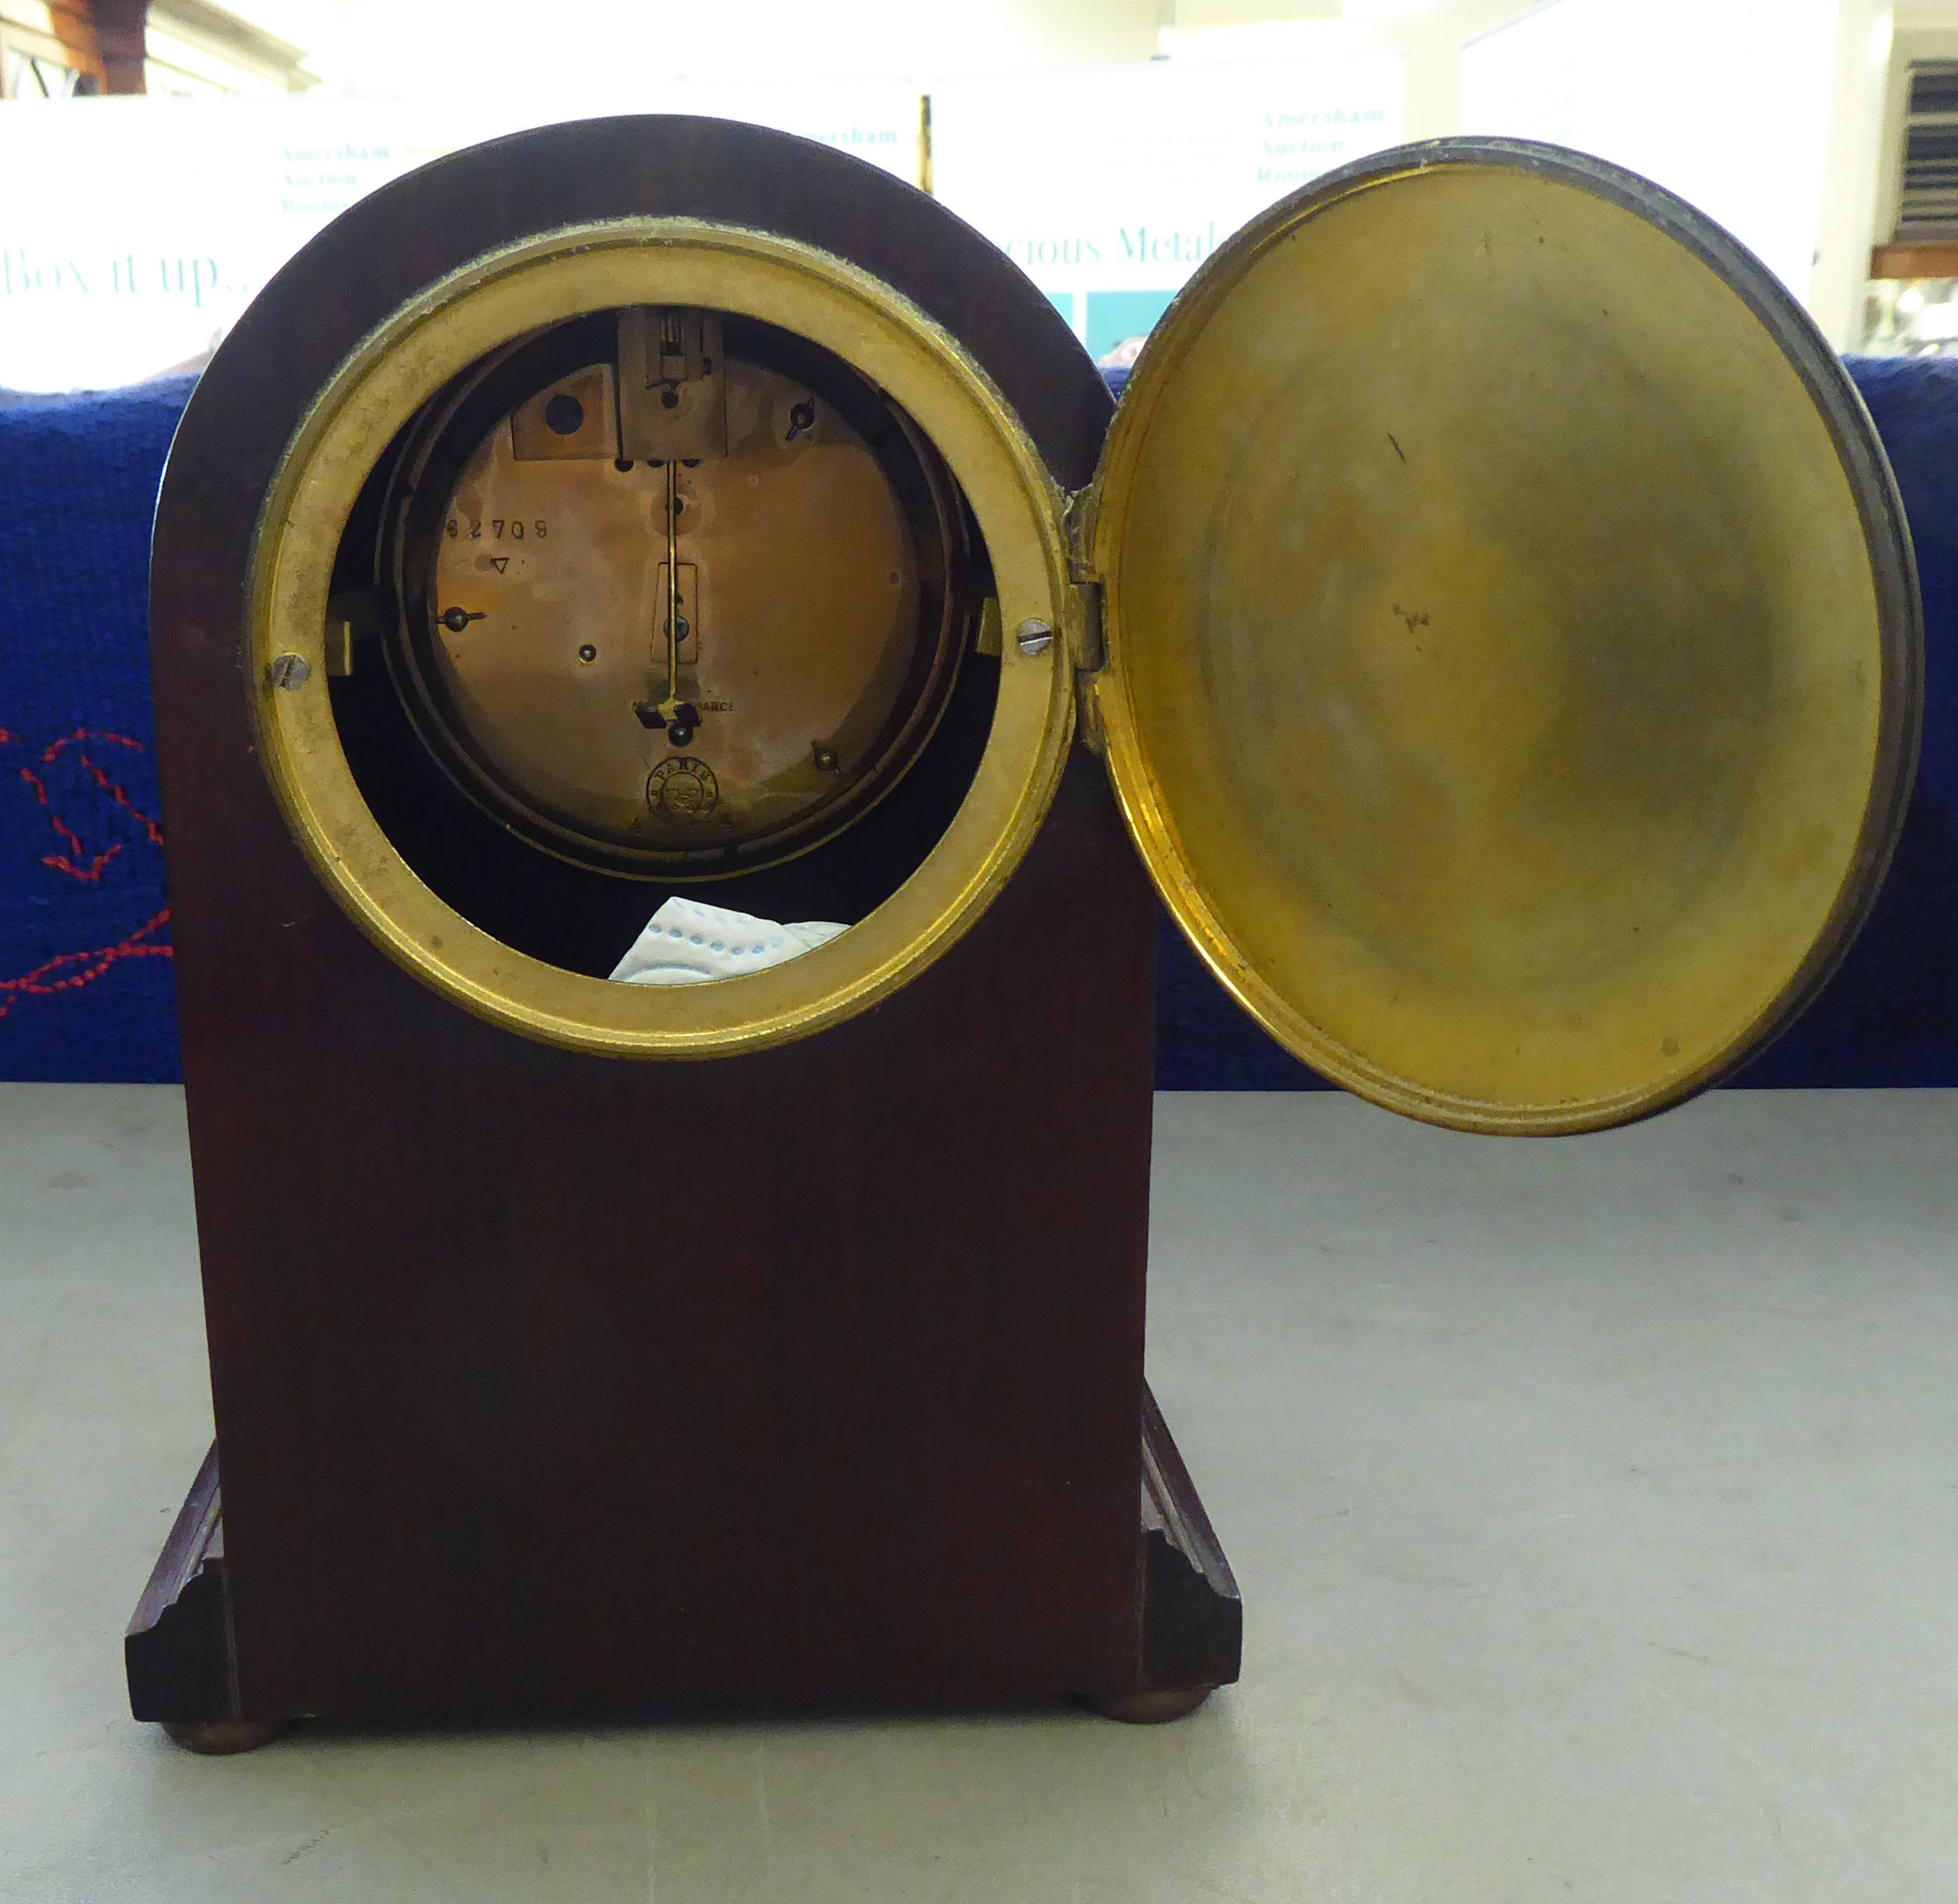 An Edwardian French mahogany cased mantel clock; faced by an Arabic dial  9"h - Image 3 of 4